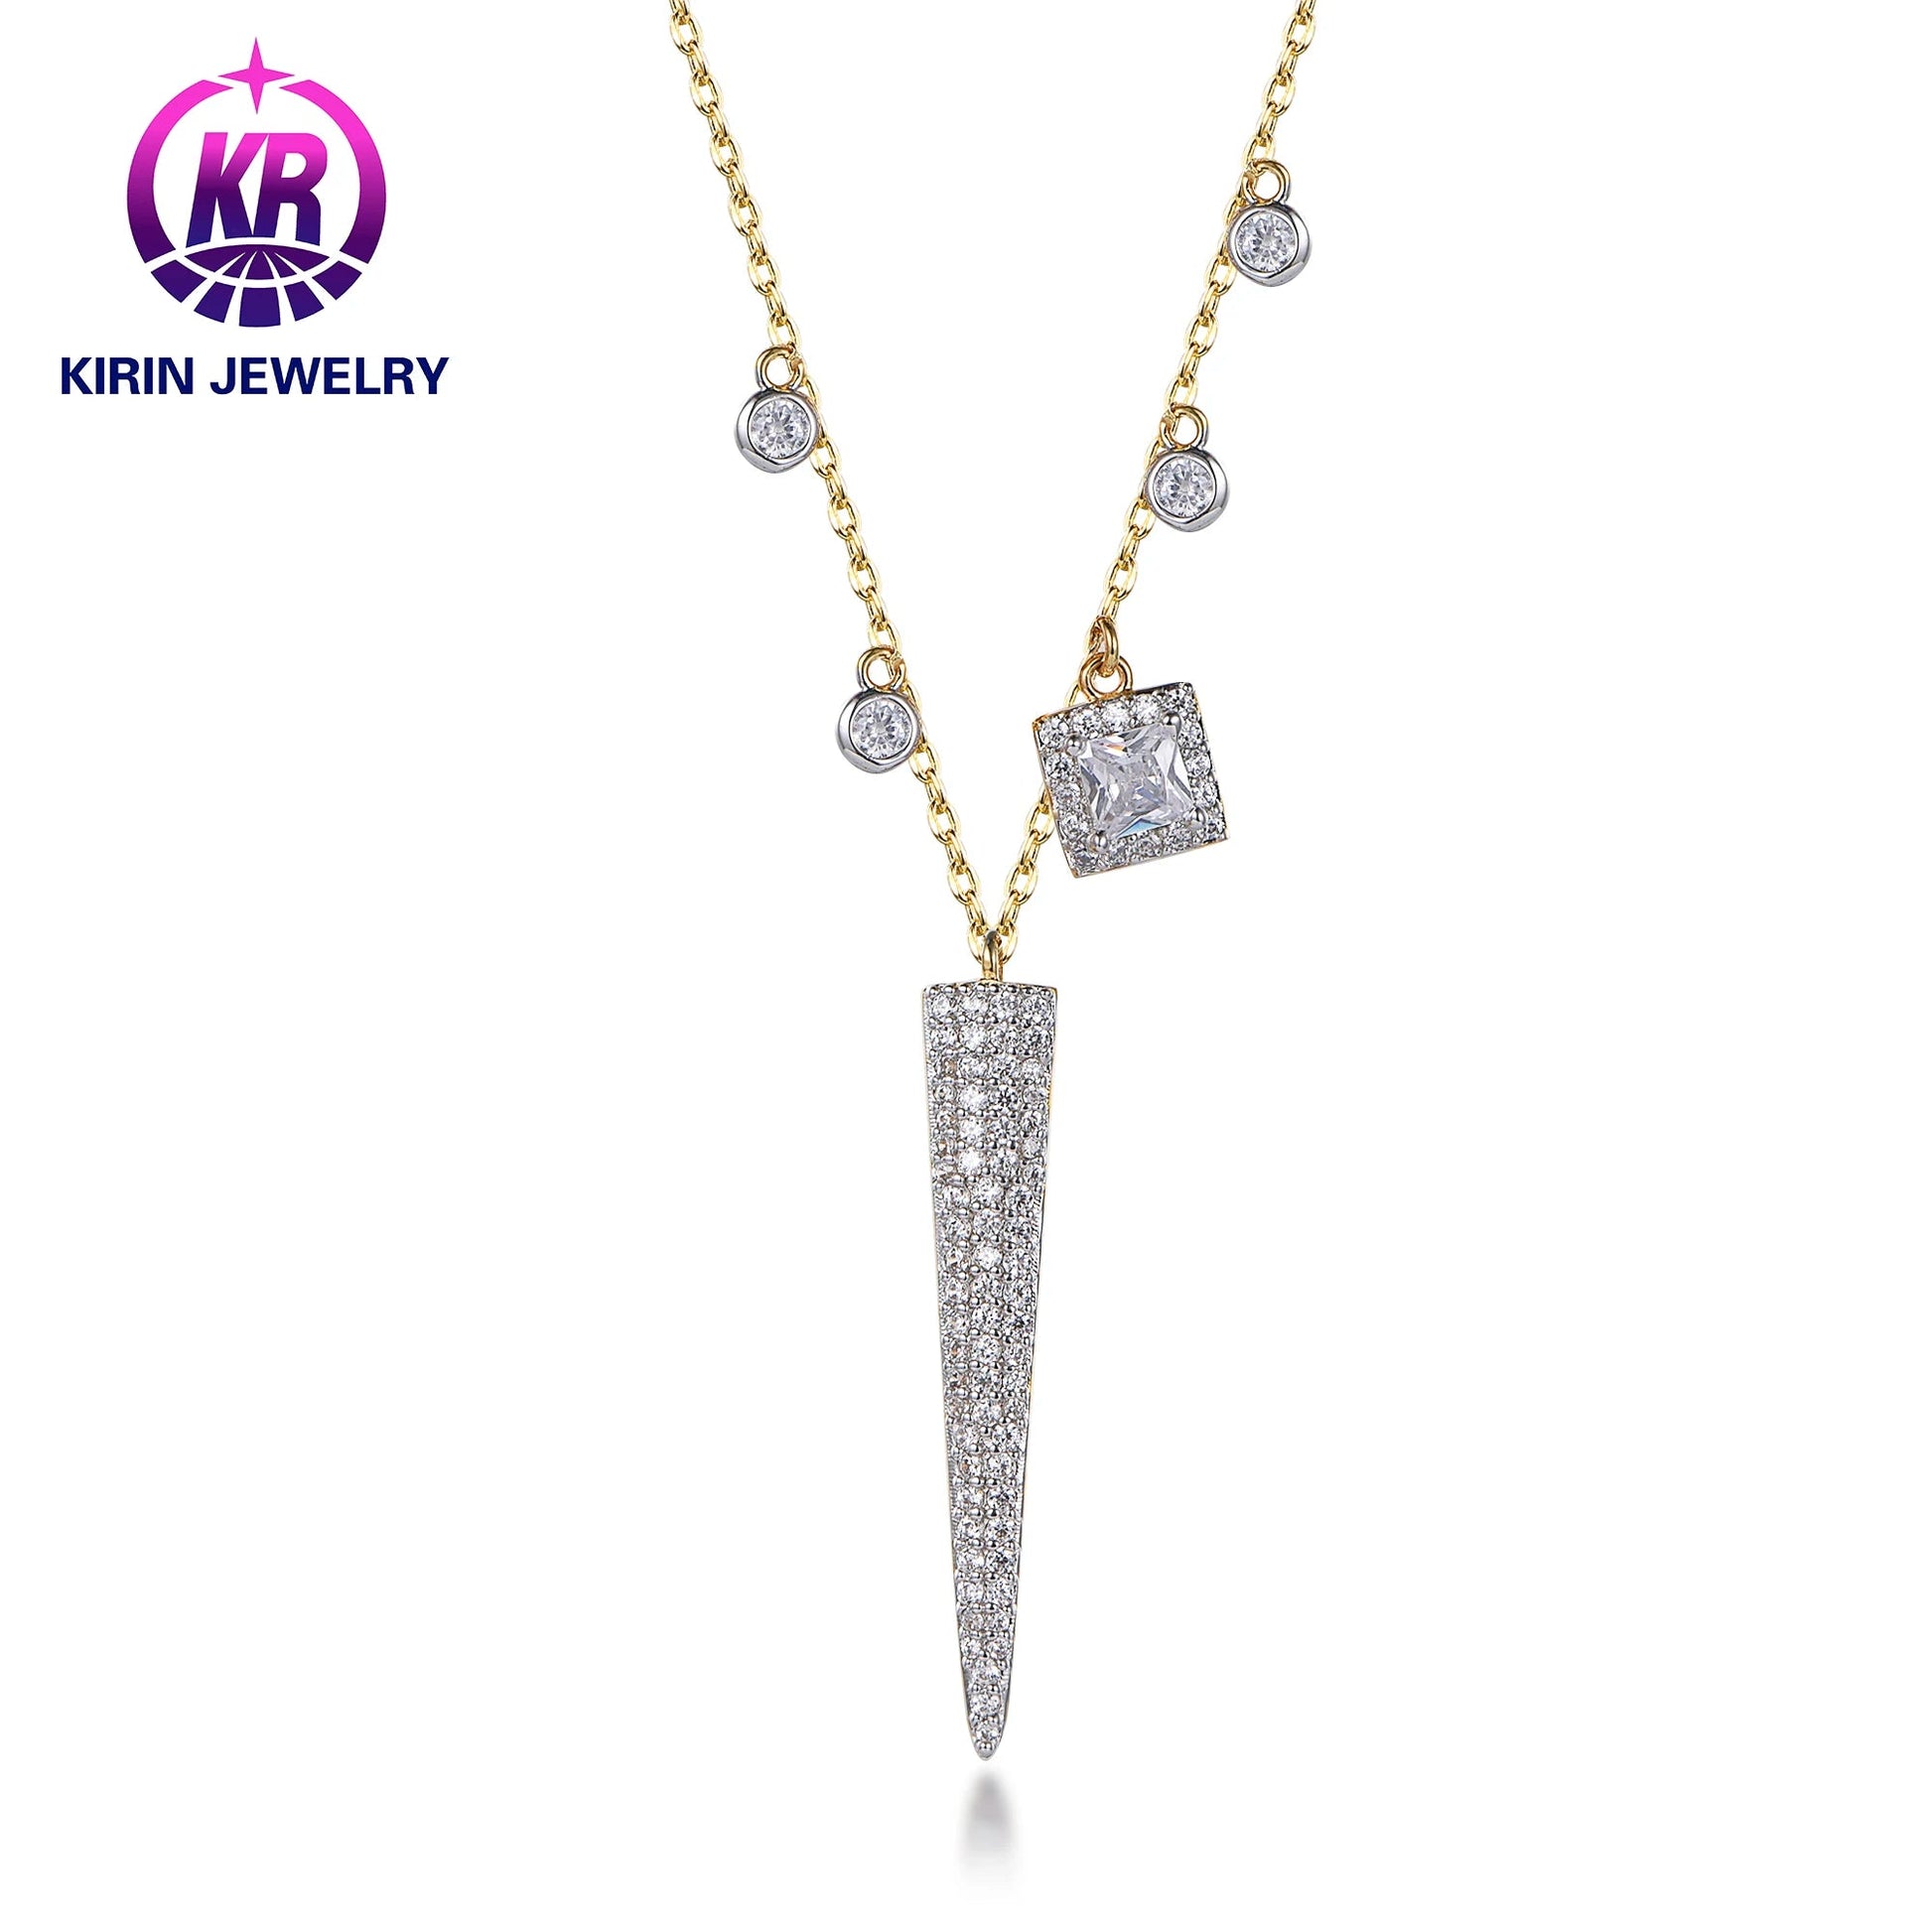 Fashion necklaces wholesale silver 925 jewelry diamond triangle shape pendant gold plate necklace for ladies Kirin Jewelry